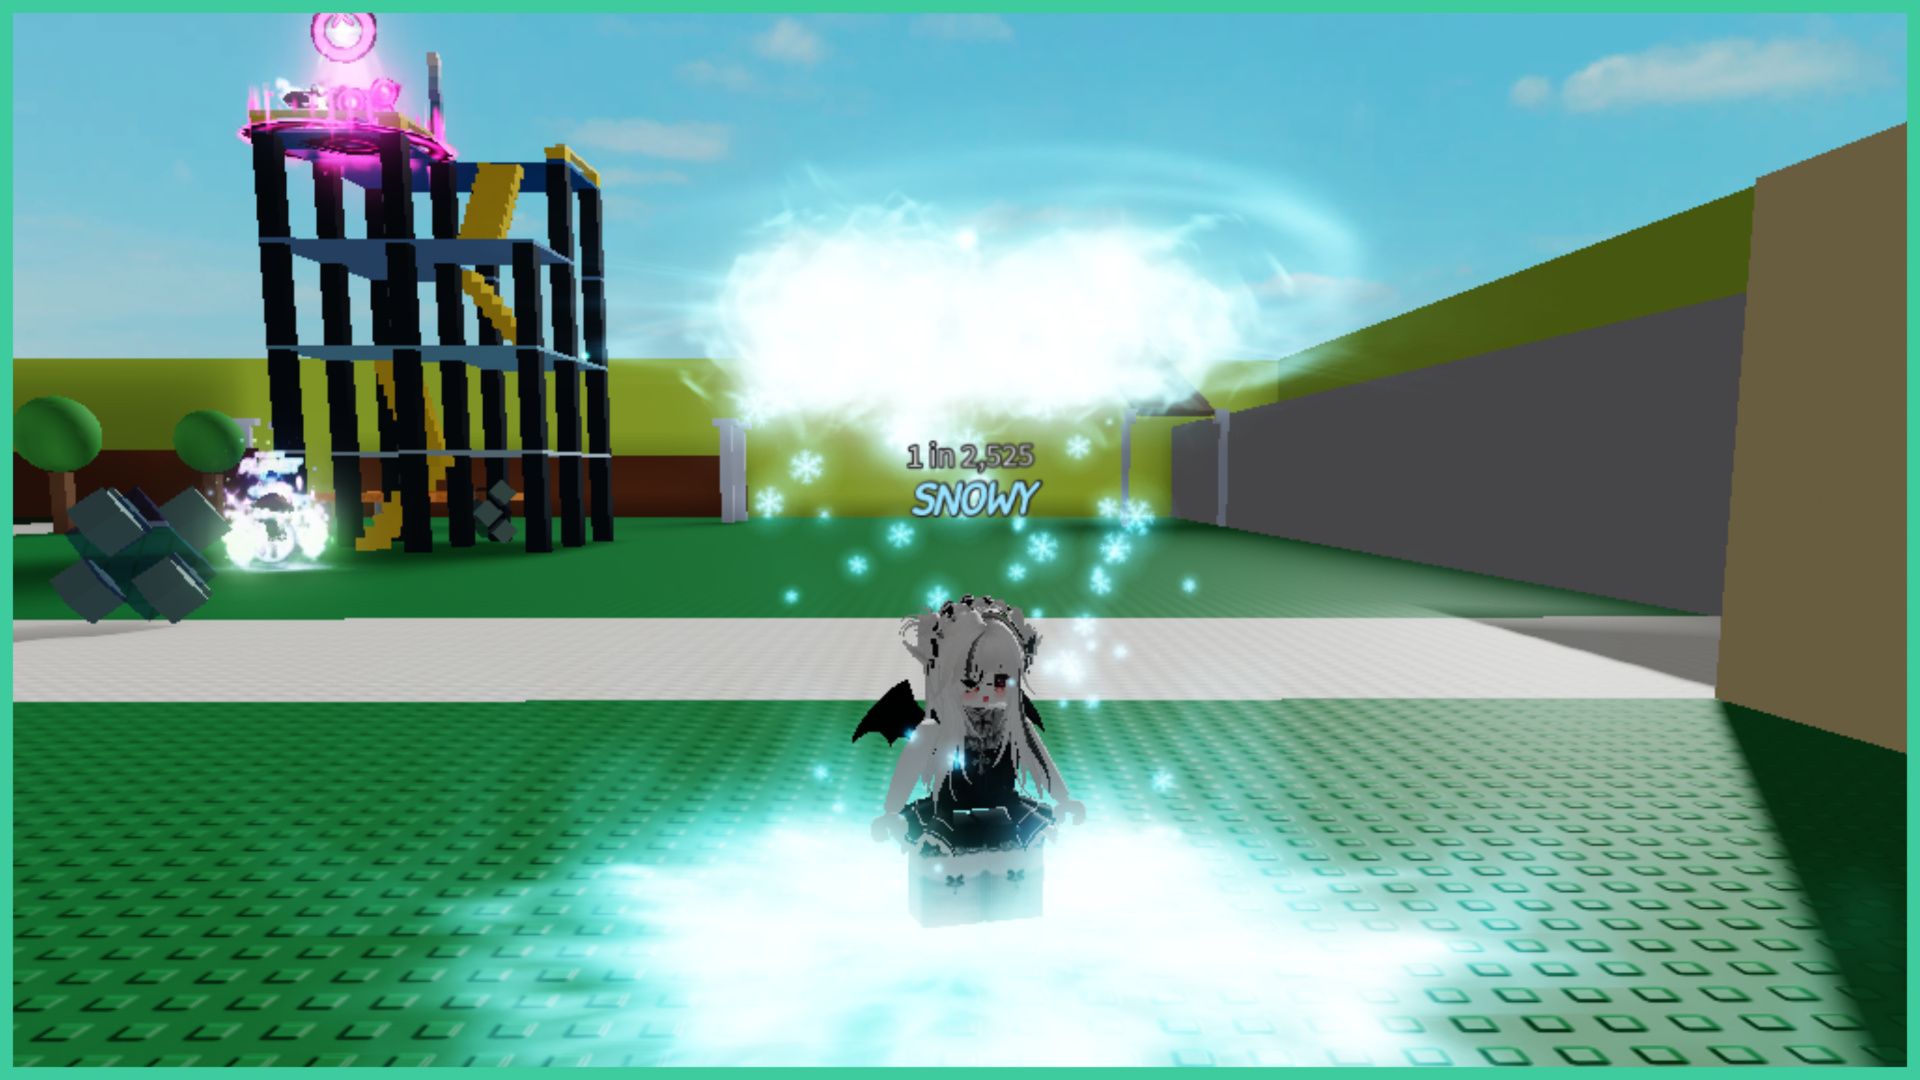 feature image for our hades rng badges guide, it is a screenshot of a roblox player equipped with the snowy aura which as the 1 in 2,525 drop chance written above, there are snowflakes falling down as frost covers the ground below the player's avatar, as well as a misty cloud above their head, there is a climbing frame in the distance with other players standing around, including one standing at the top of the climbing frame